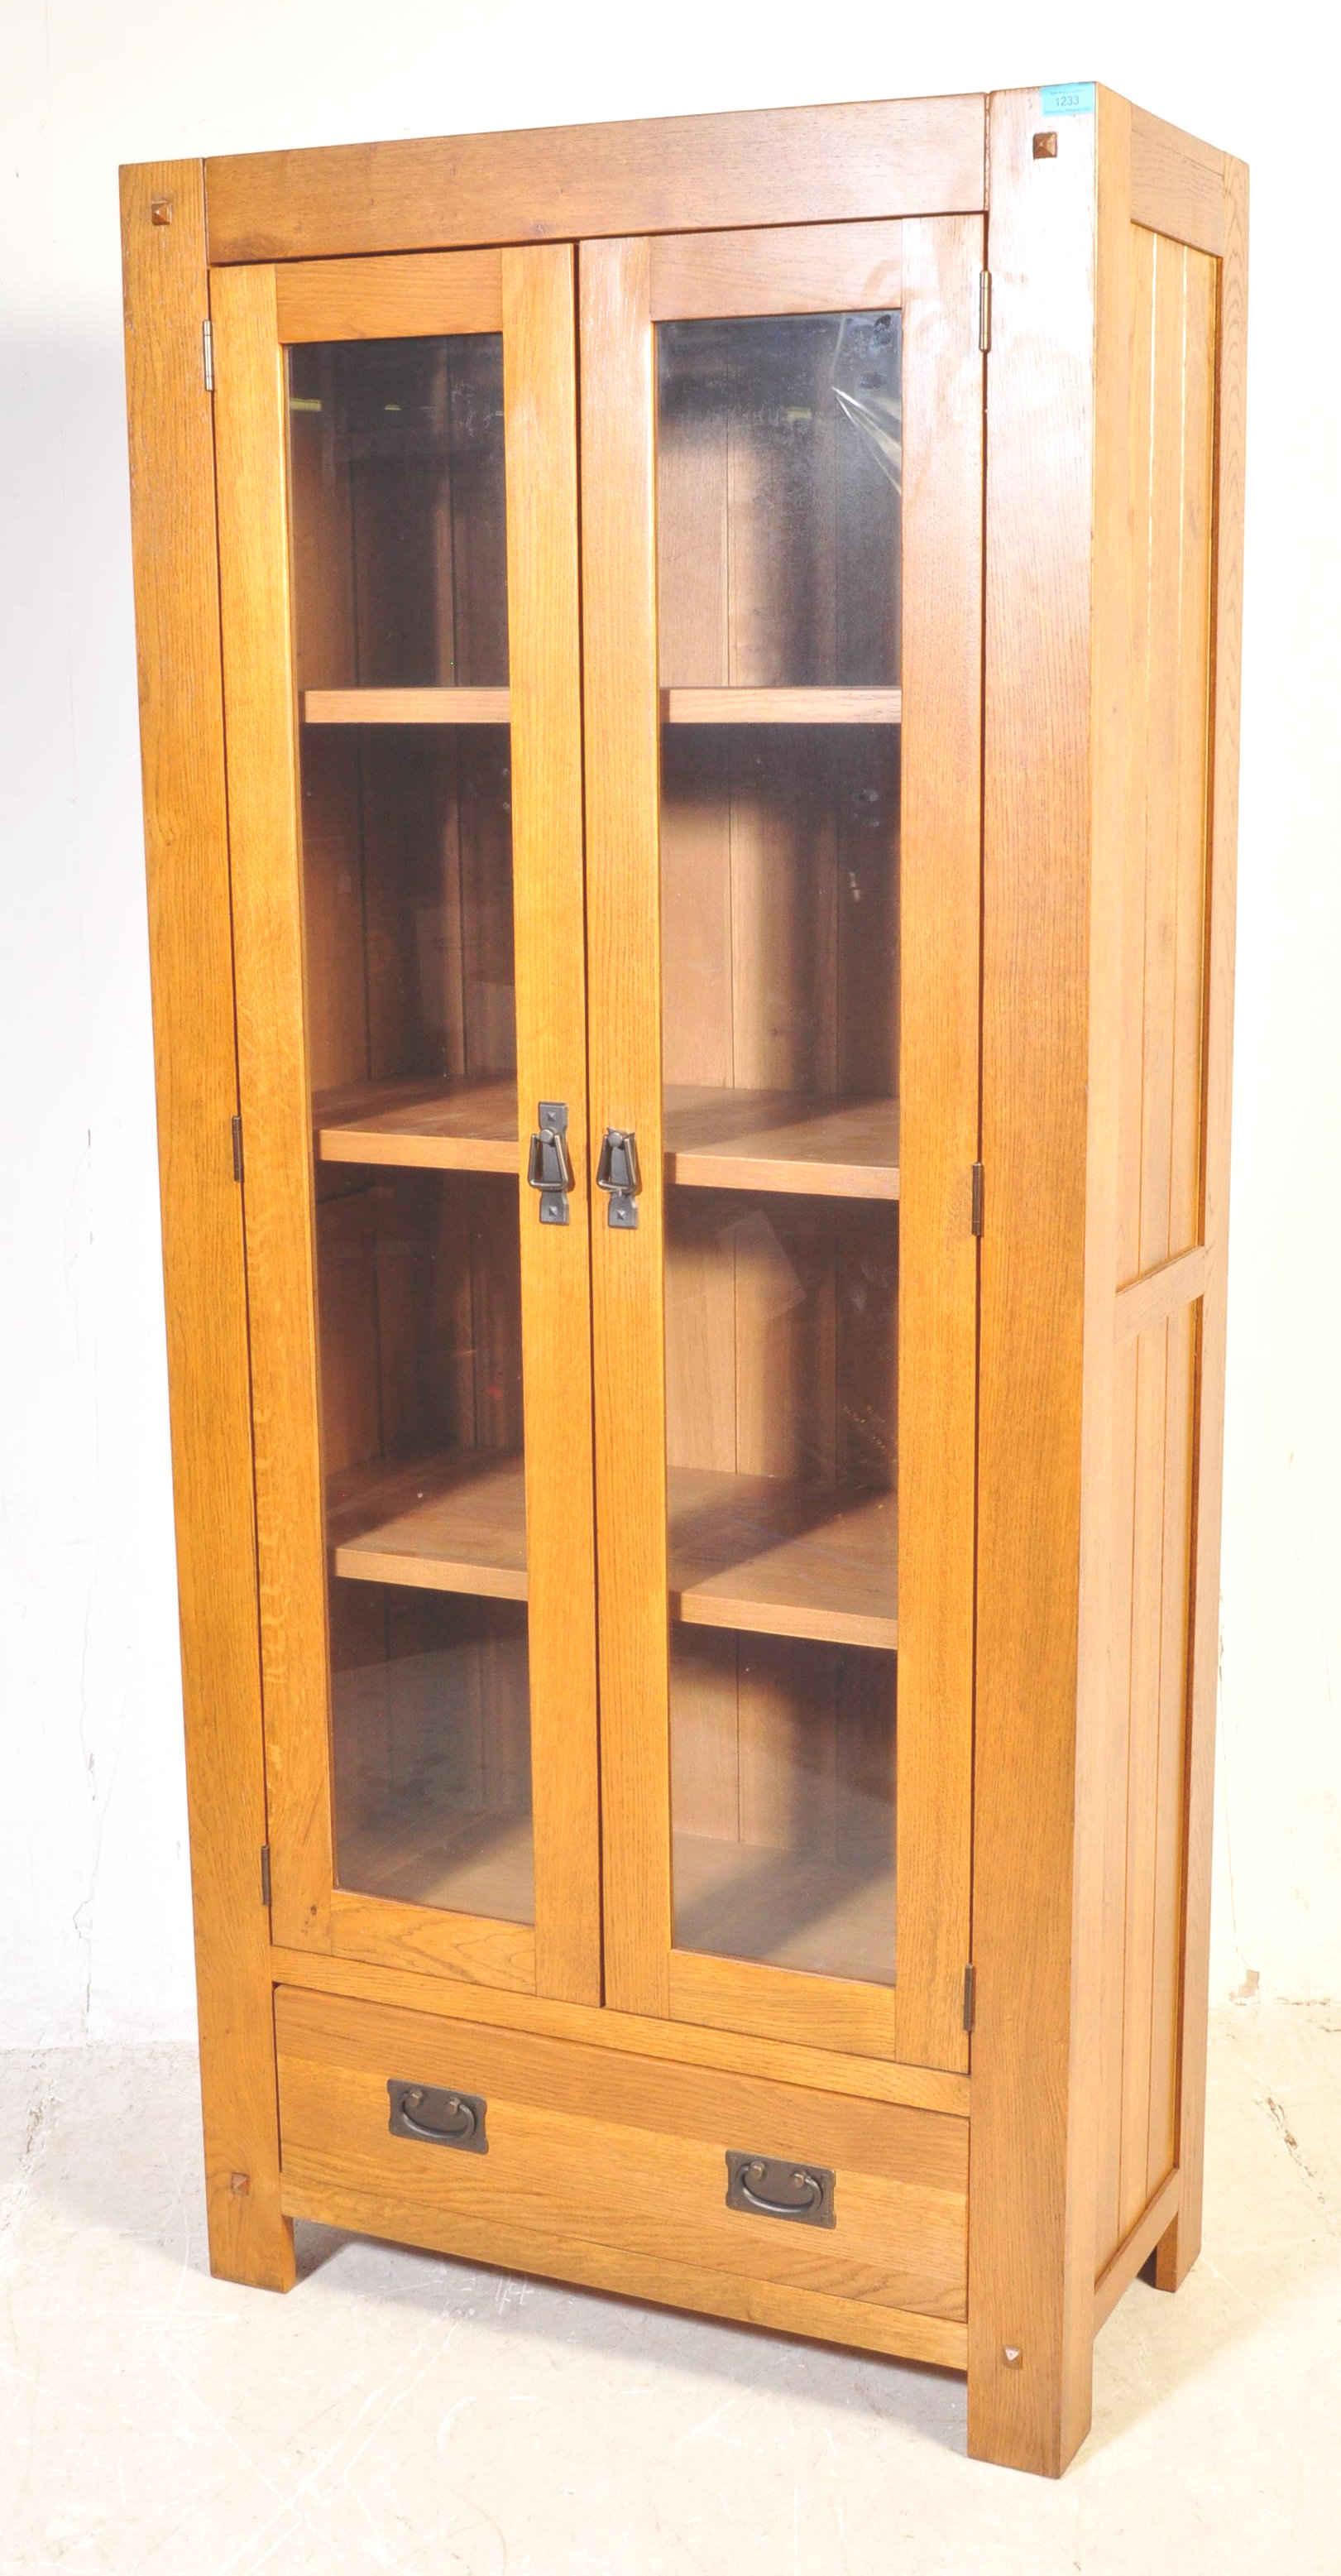 CONTEMPORARY OAK FURNITURE LAND STYLE BOOKCASE - Image 2 of 5